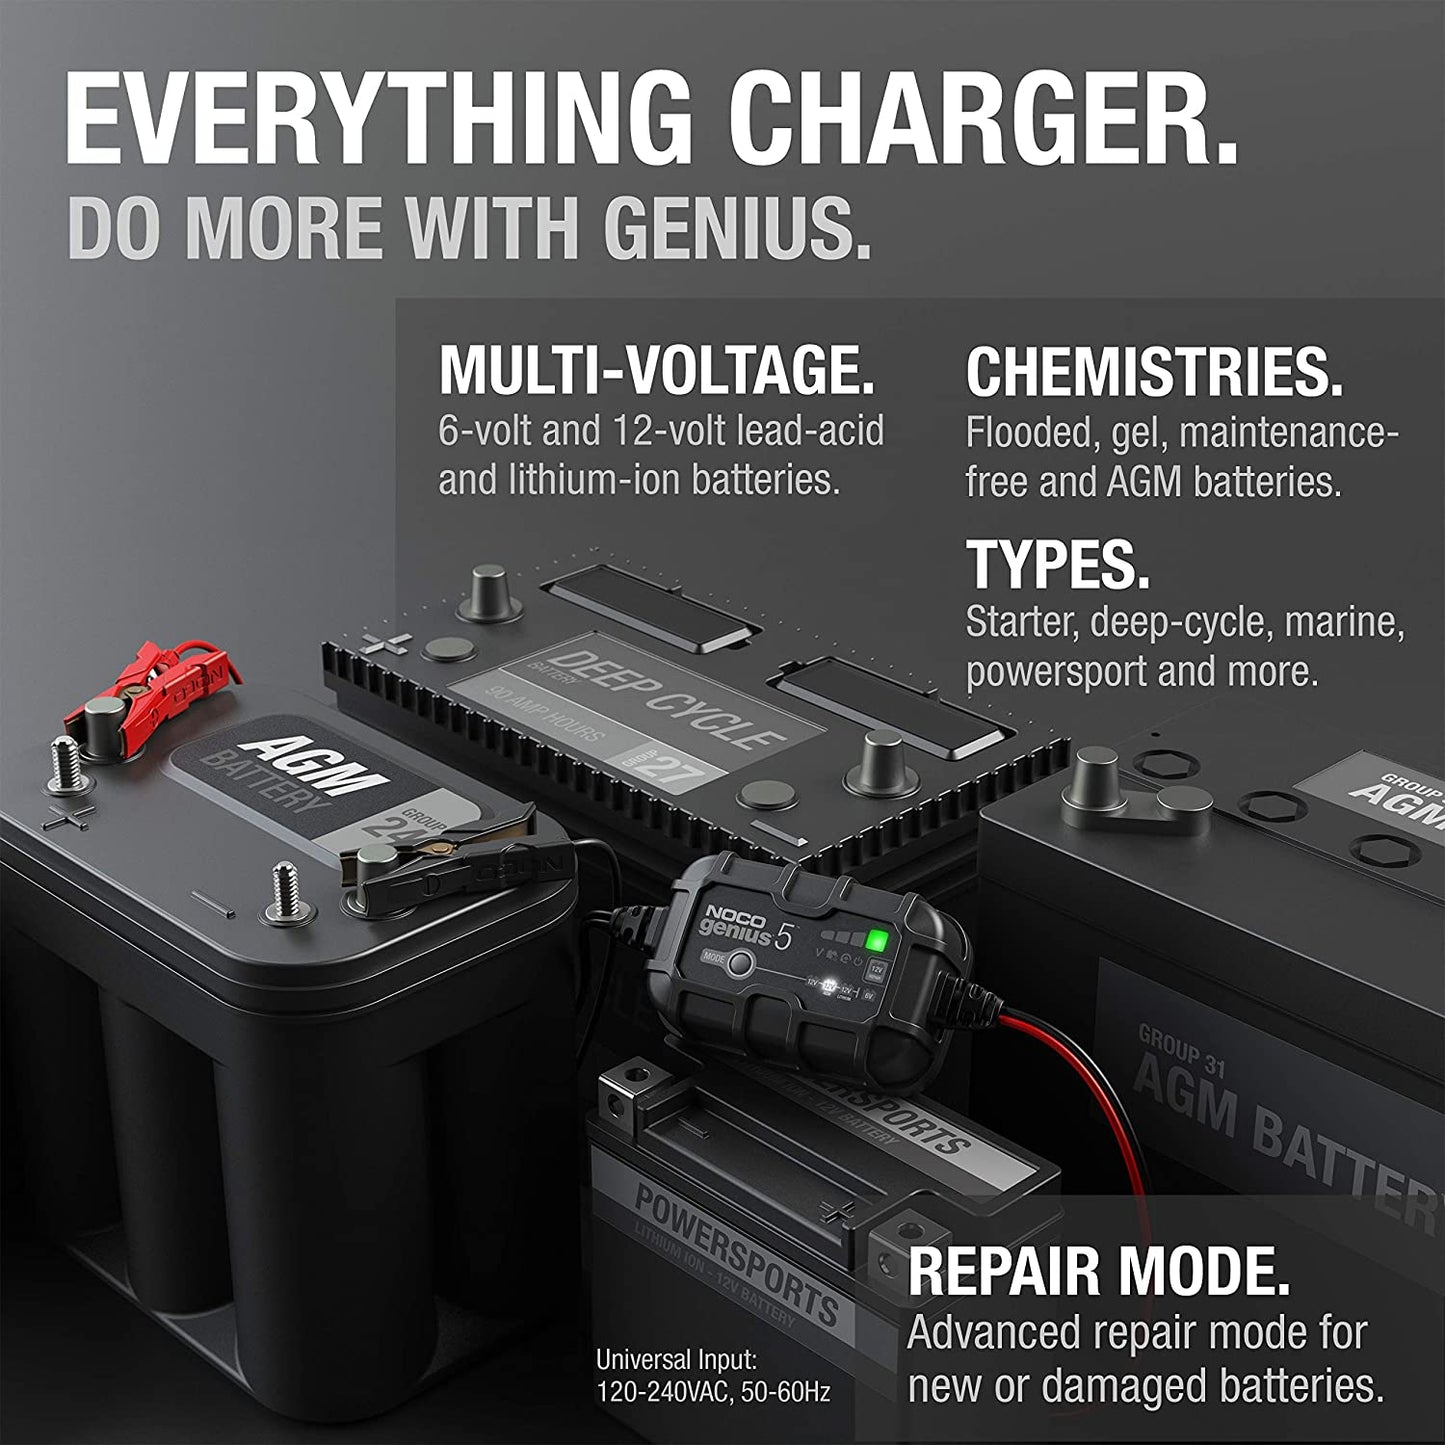 Noco Genius5 5 Amp Battery Charger, Maintainer, and Desulfator